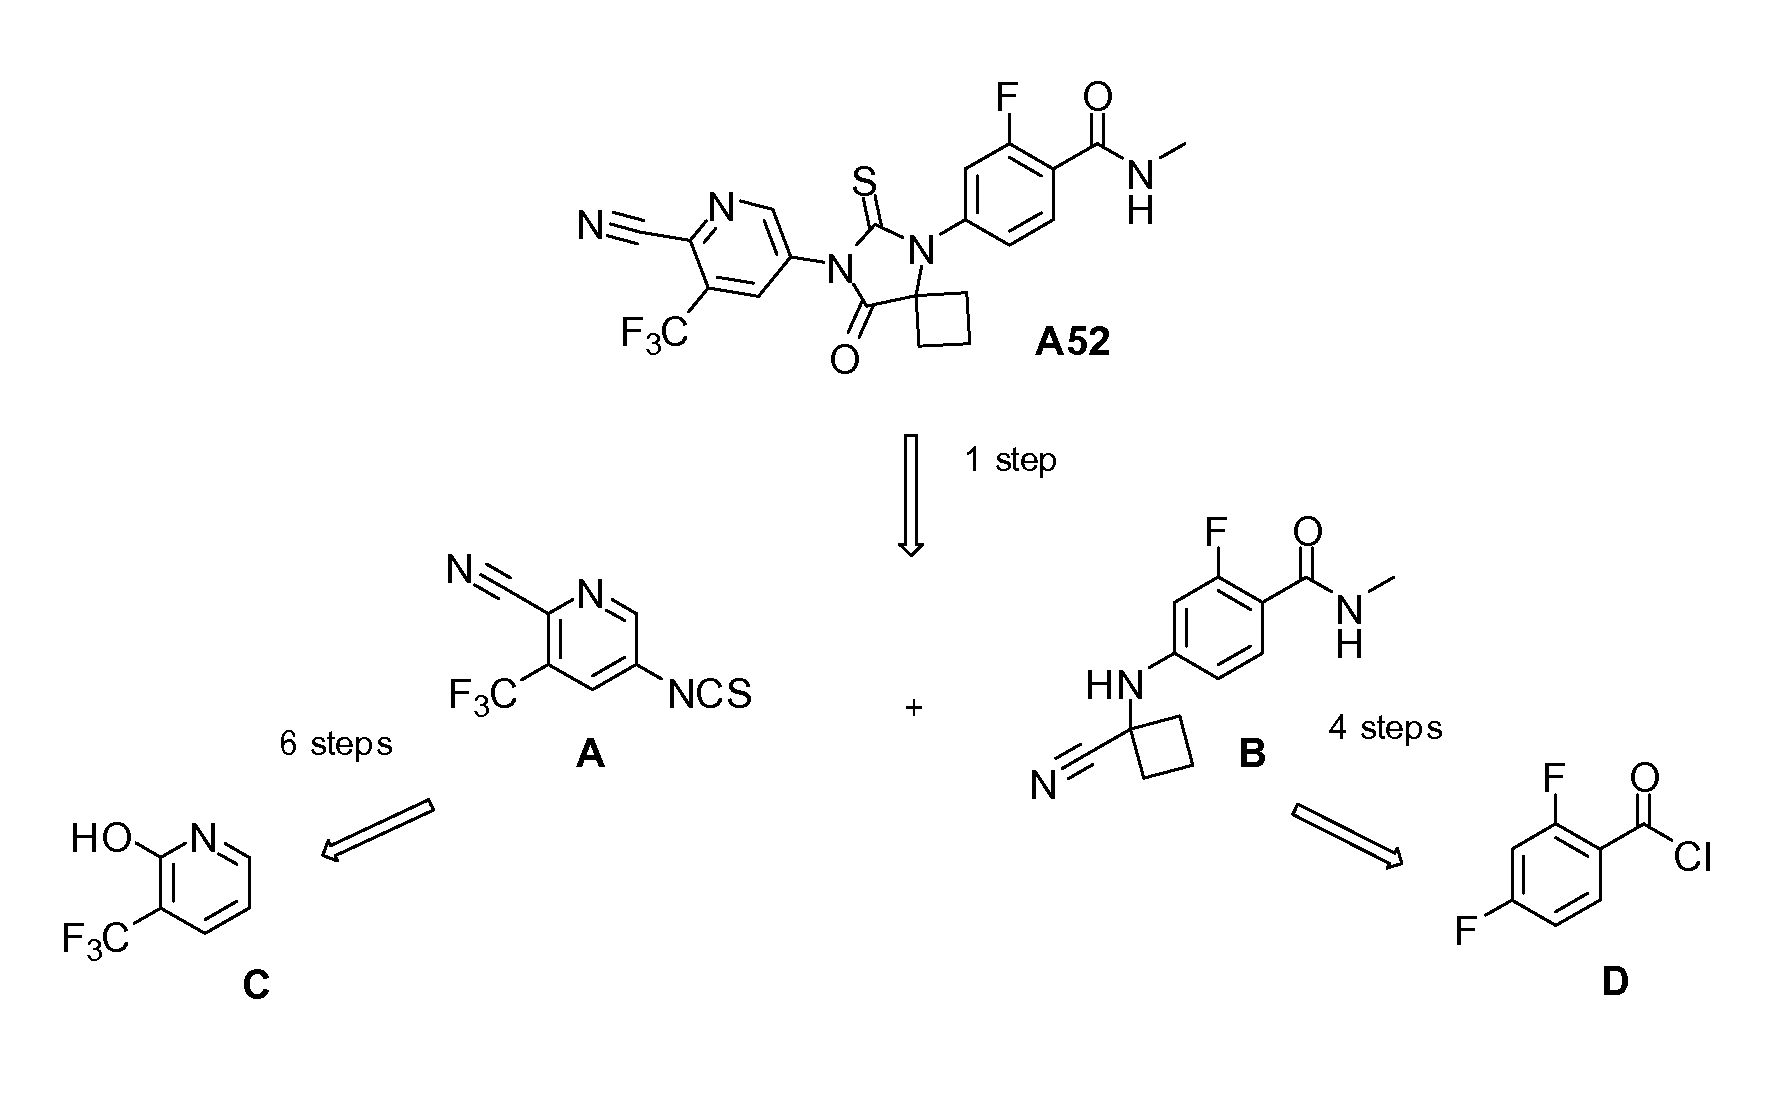 Synthesis of thiohydantoins